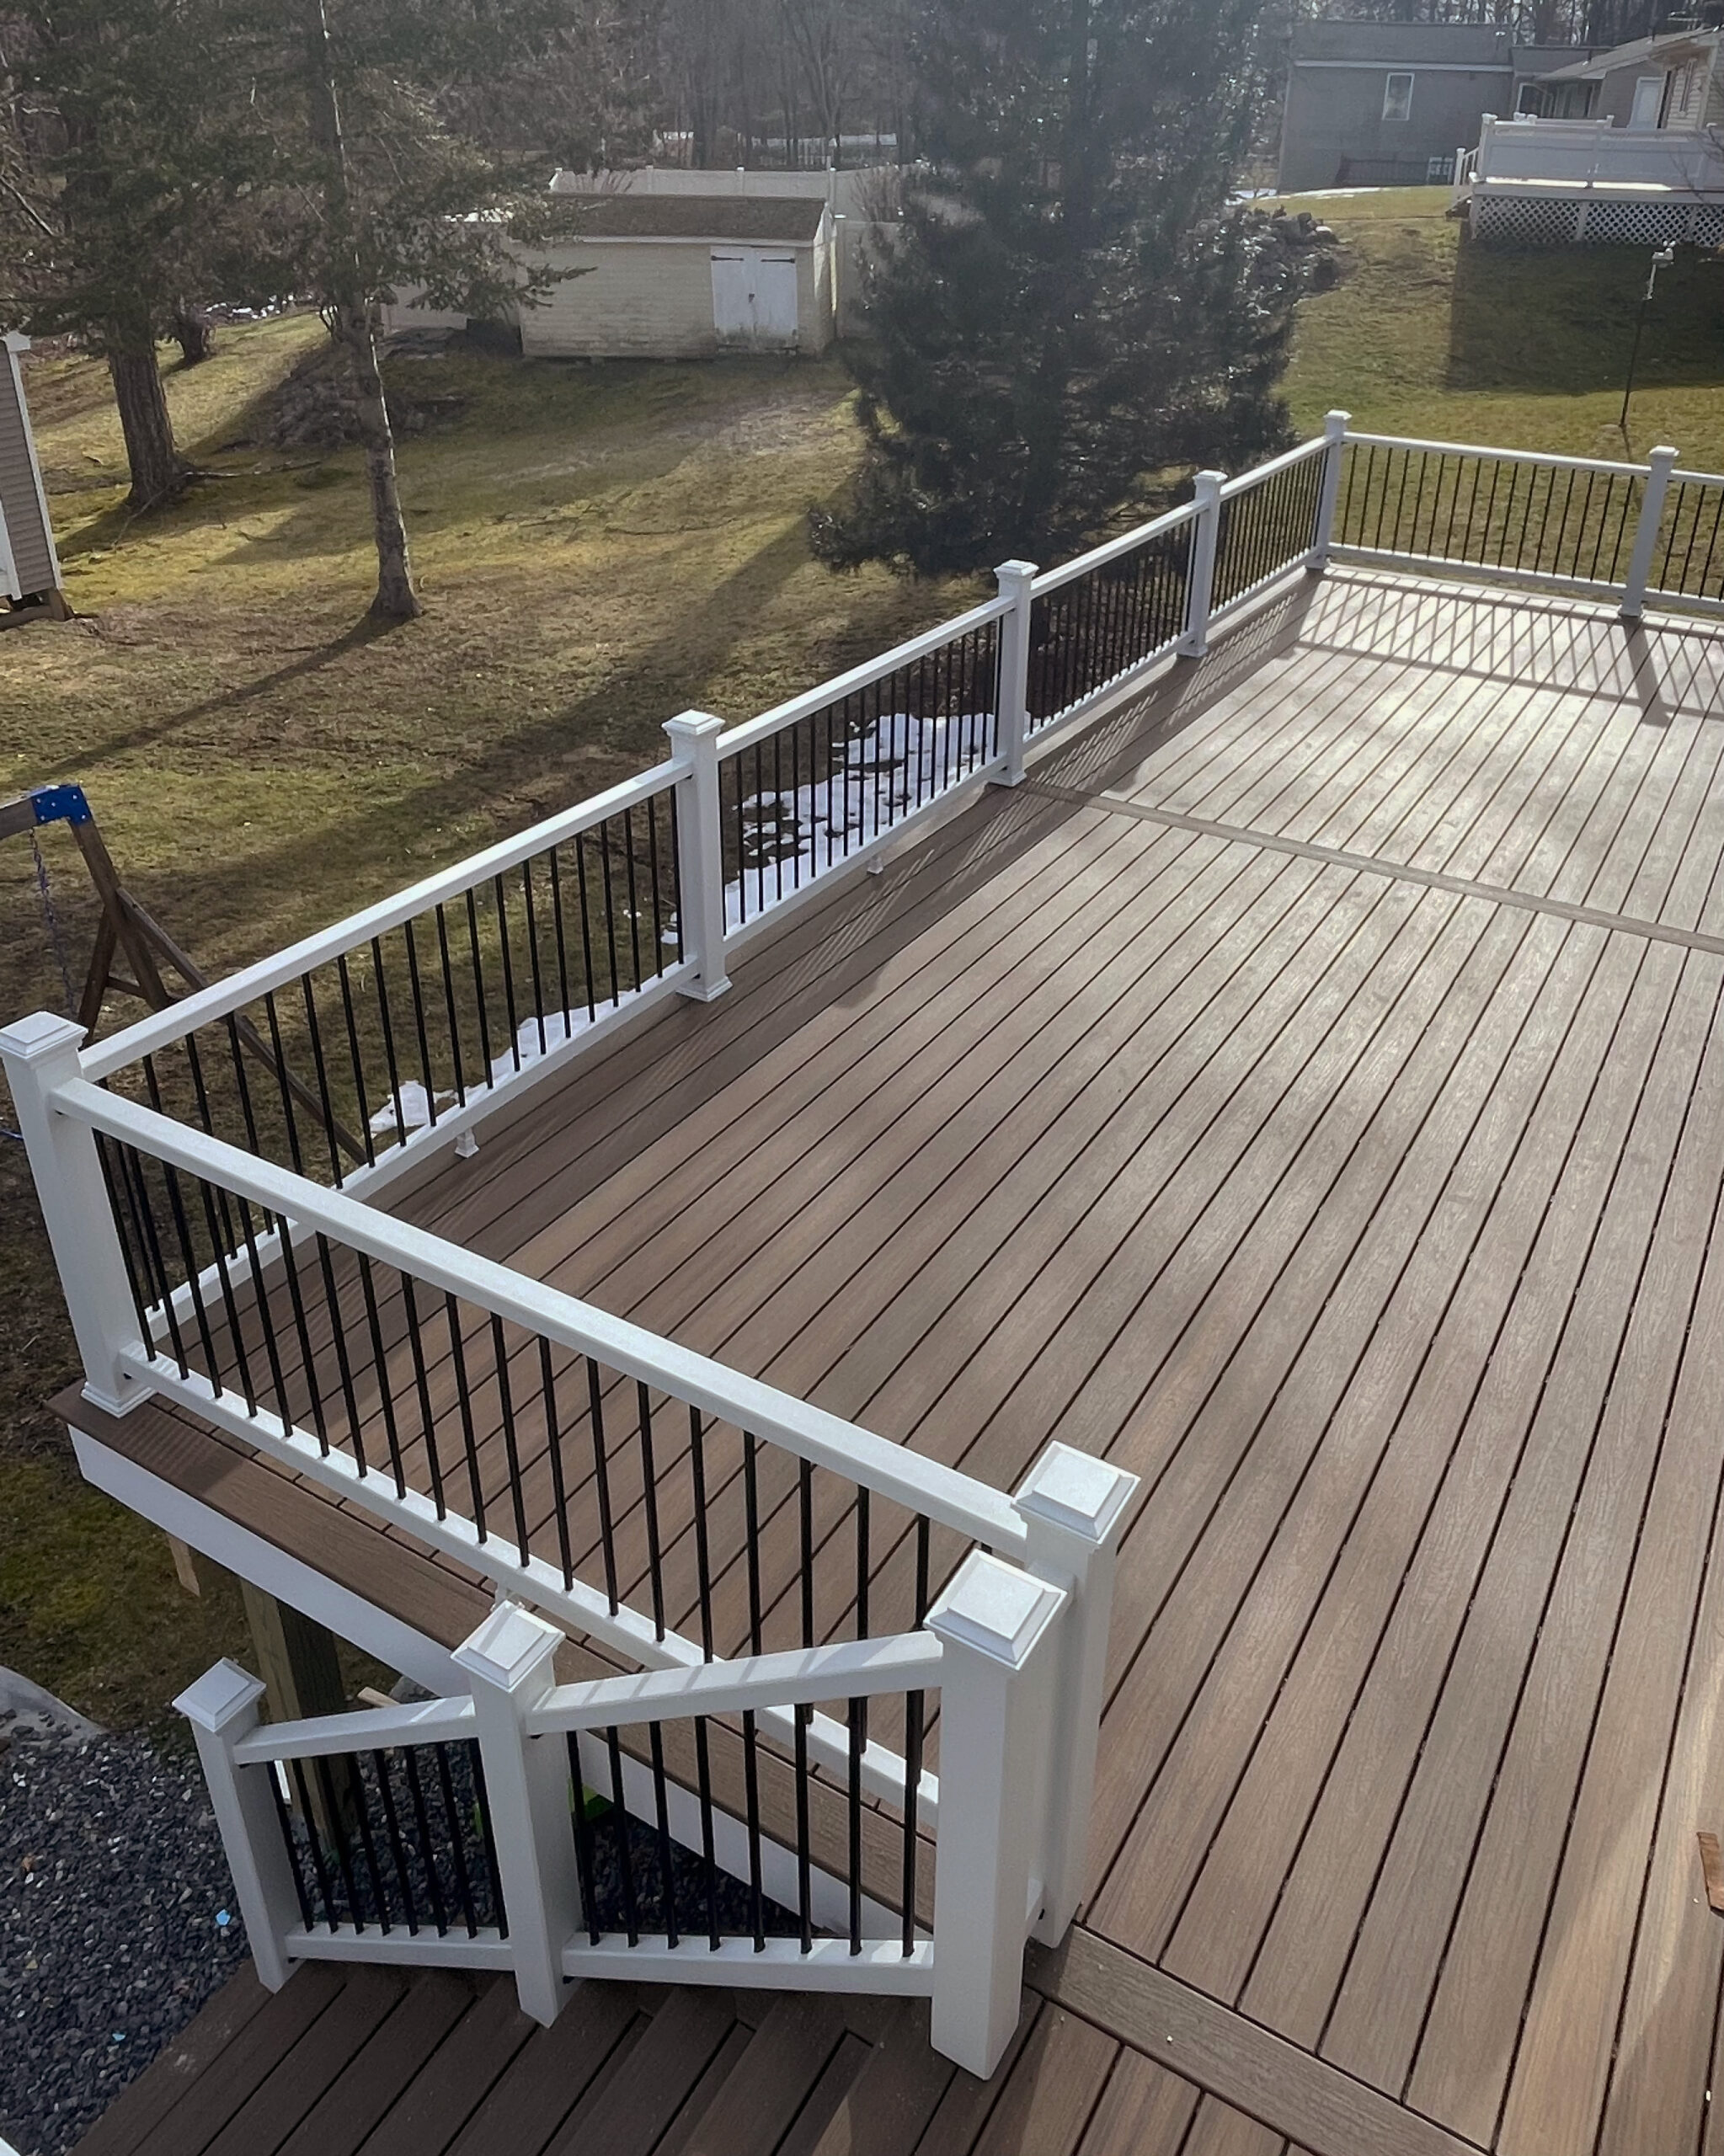 Trex composite decking in color Toasted Sand with Trex select railings in white with black balusters.